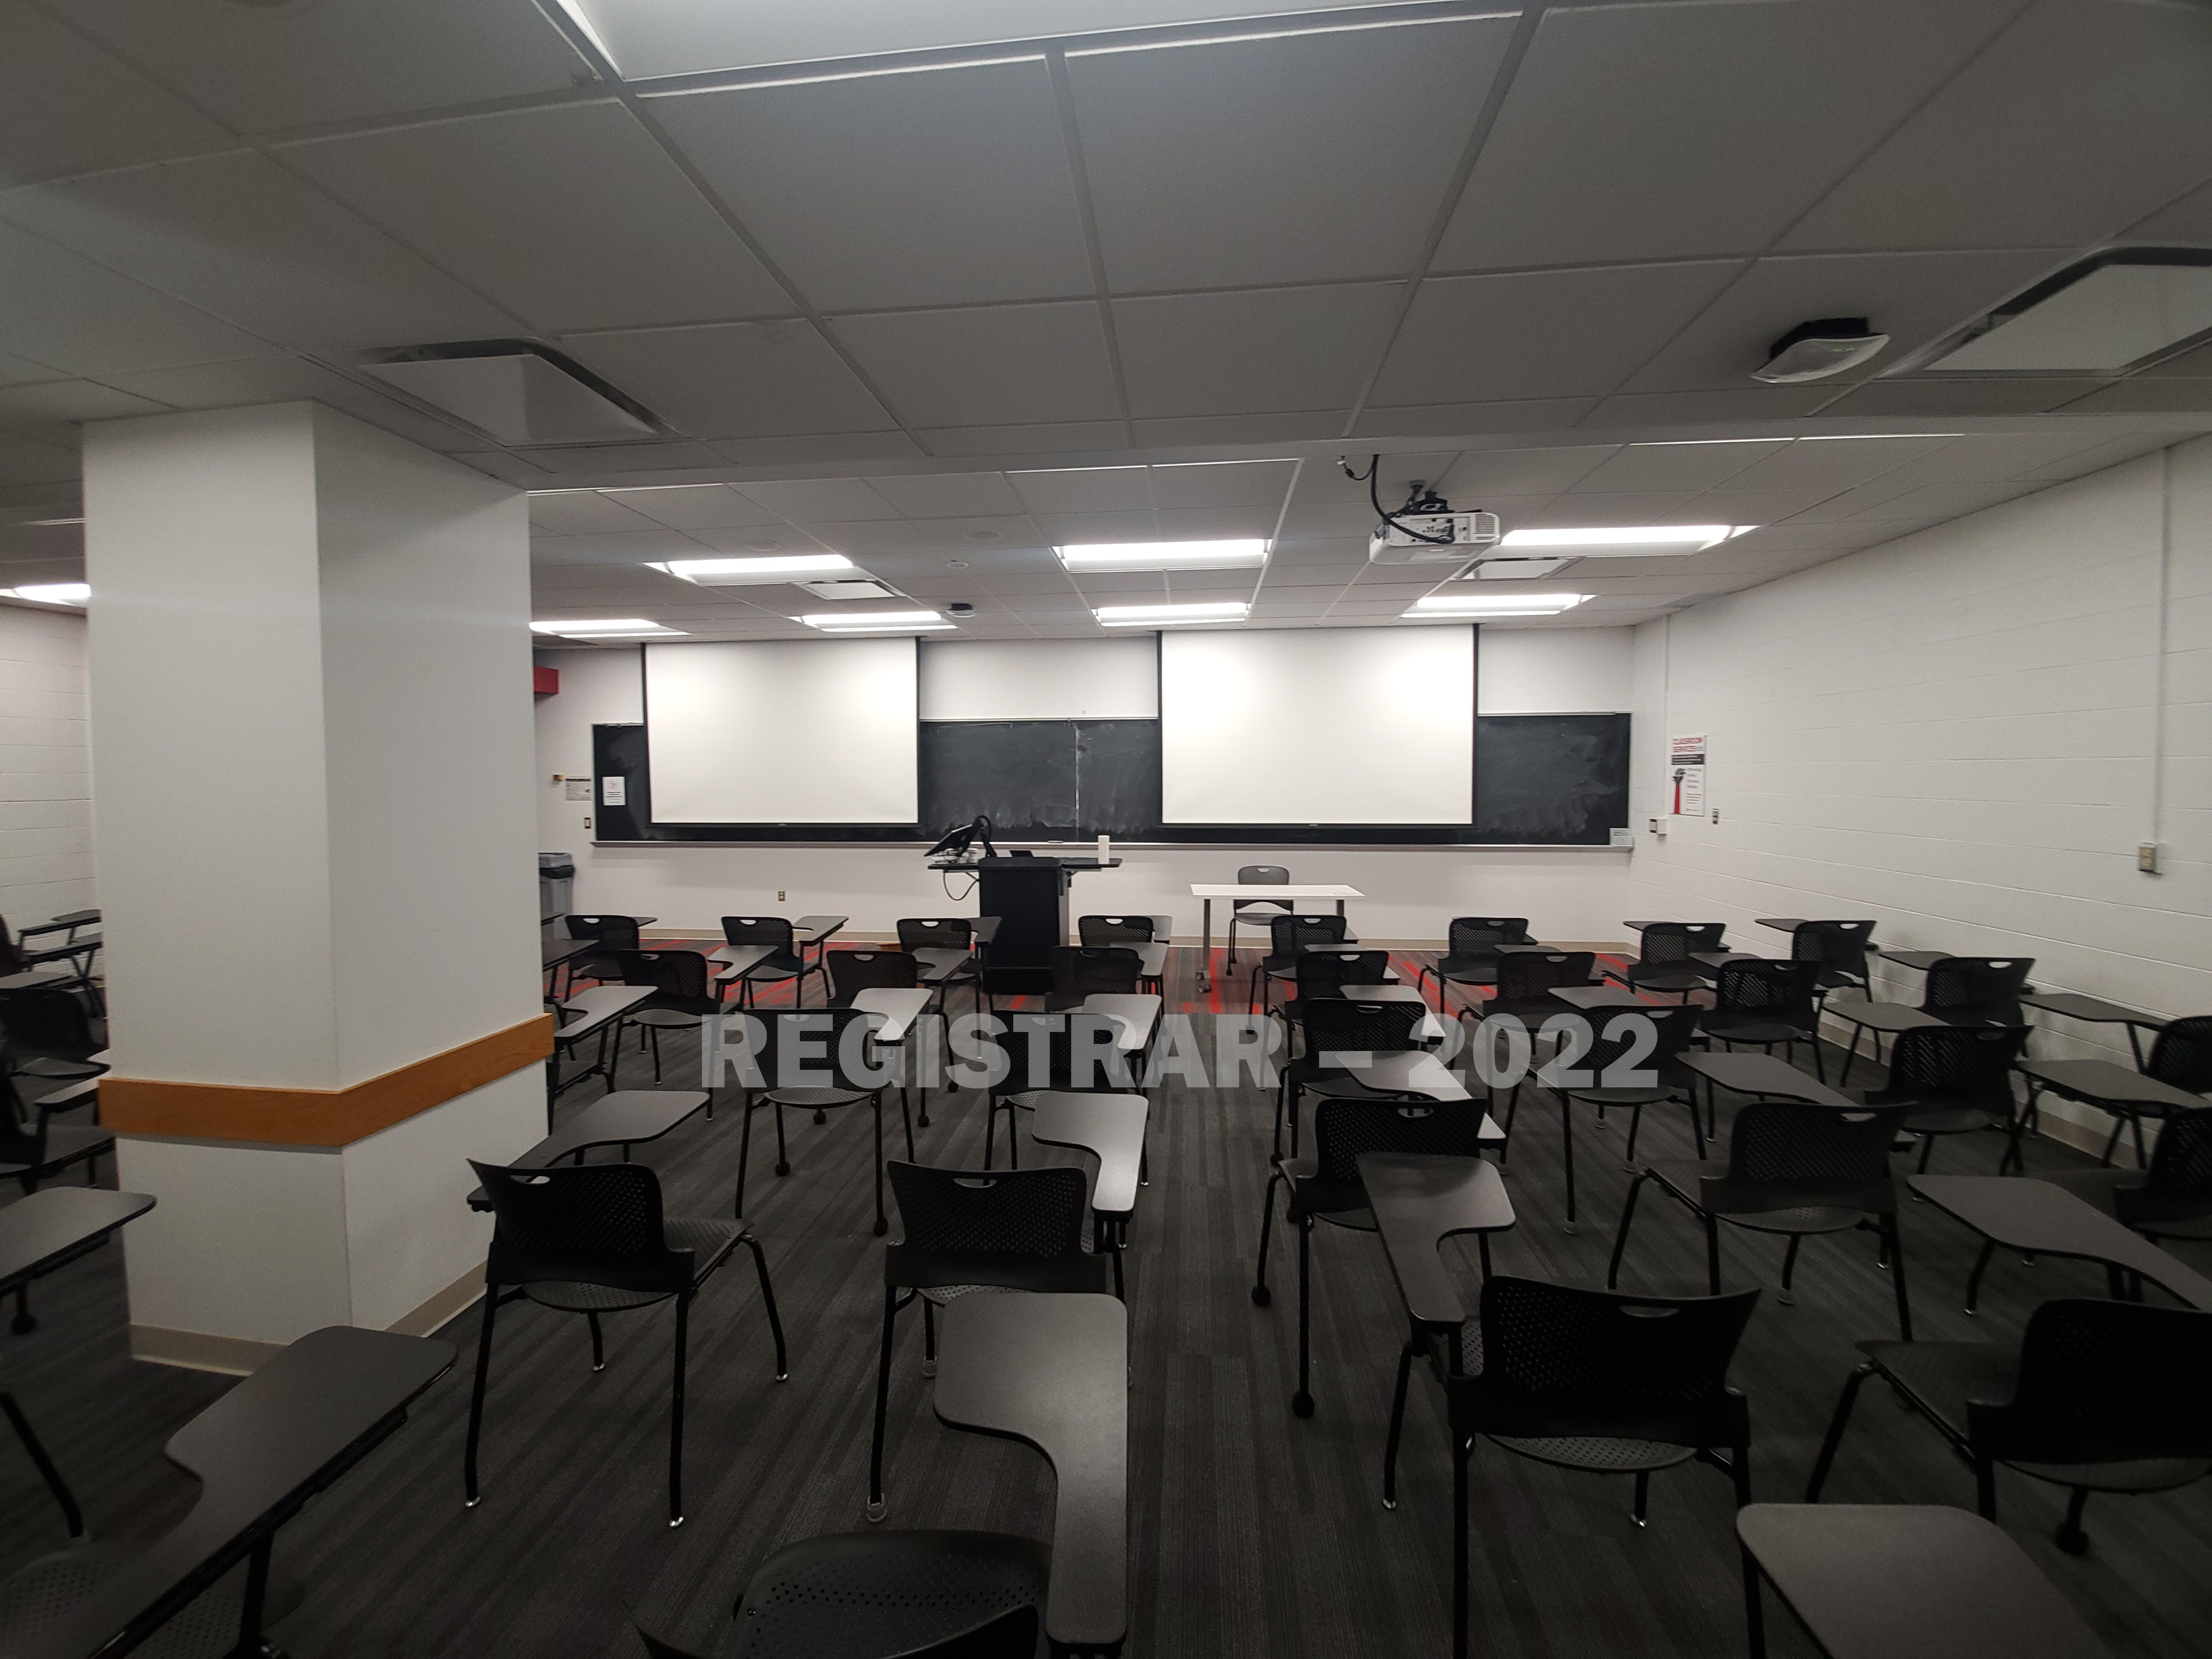 Baker Systems Engineering room 144 ultra wide angle view from the back of the room with projector screen down